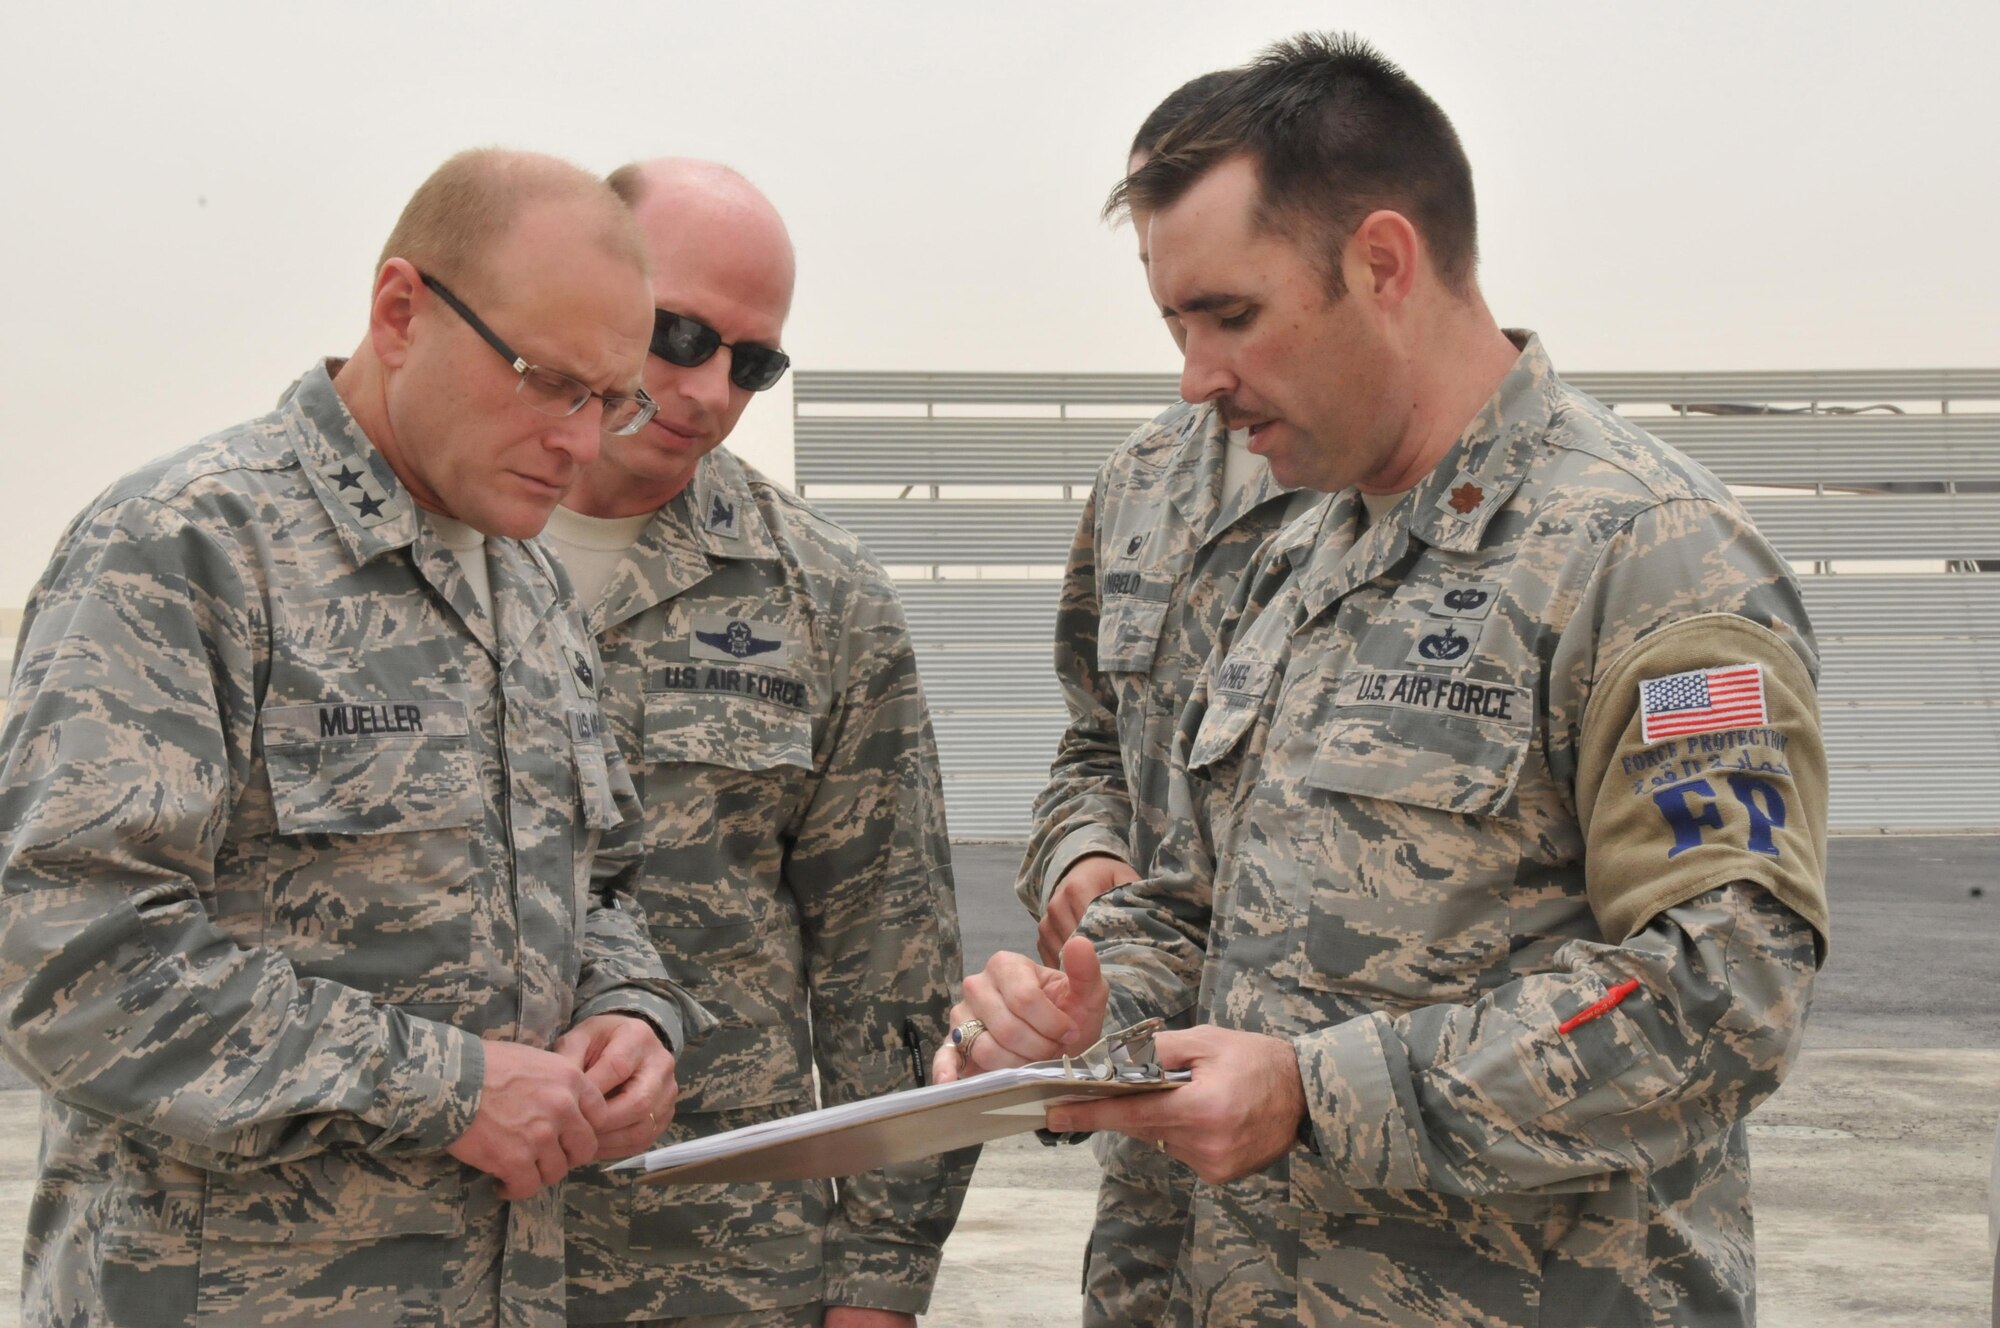 Maj. Gen. Andrew Mueller (left), Air Force Chief of Safety, discusses flight line construction with Maj. Robert Barnes (right), 379th Expeditionary Civil Engineer Squadron deputy commander, March 16 at Al Udeid Air Base, Qatar. Barnes briefed Muller on the 379th ECES and 1st Expeditionary Civil Engineer Group repairs of the close air support ramp and taxiway to minimize risks to aircraft operations, as well as steps taken to mitigate other potential hazards. (U.S. Air Force photo by Tech. Sgt. Terrica Y. Jones/Released)